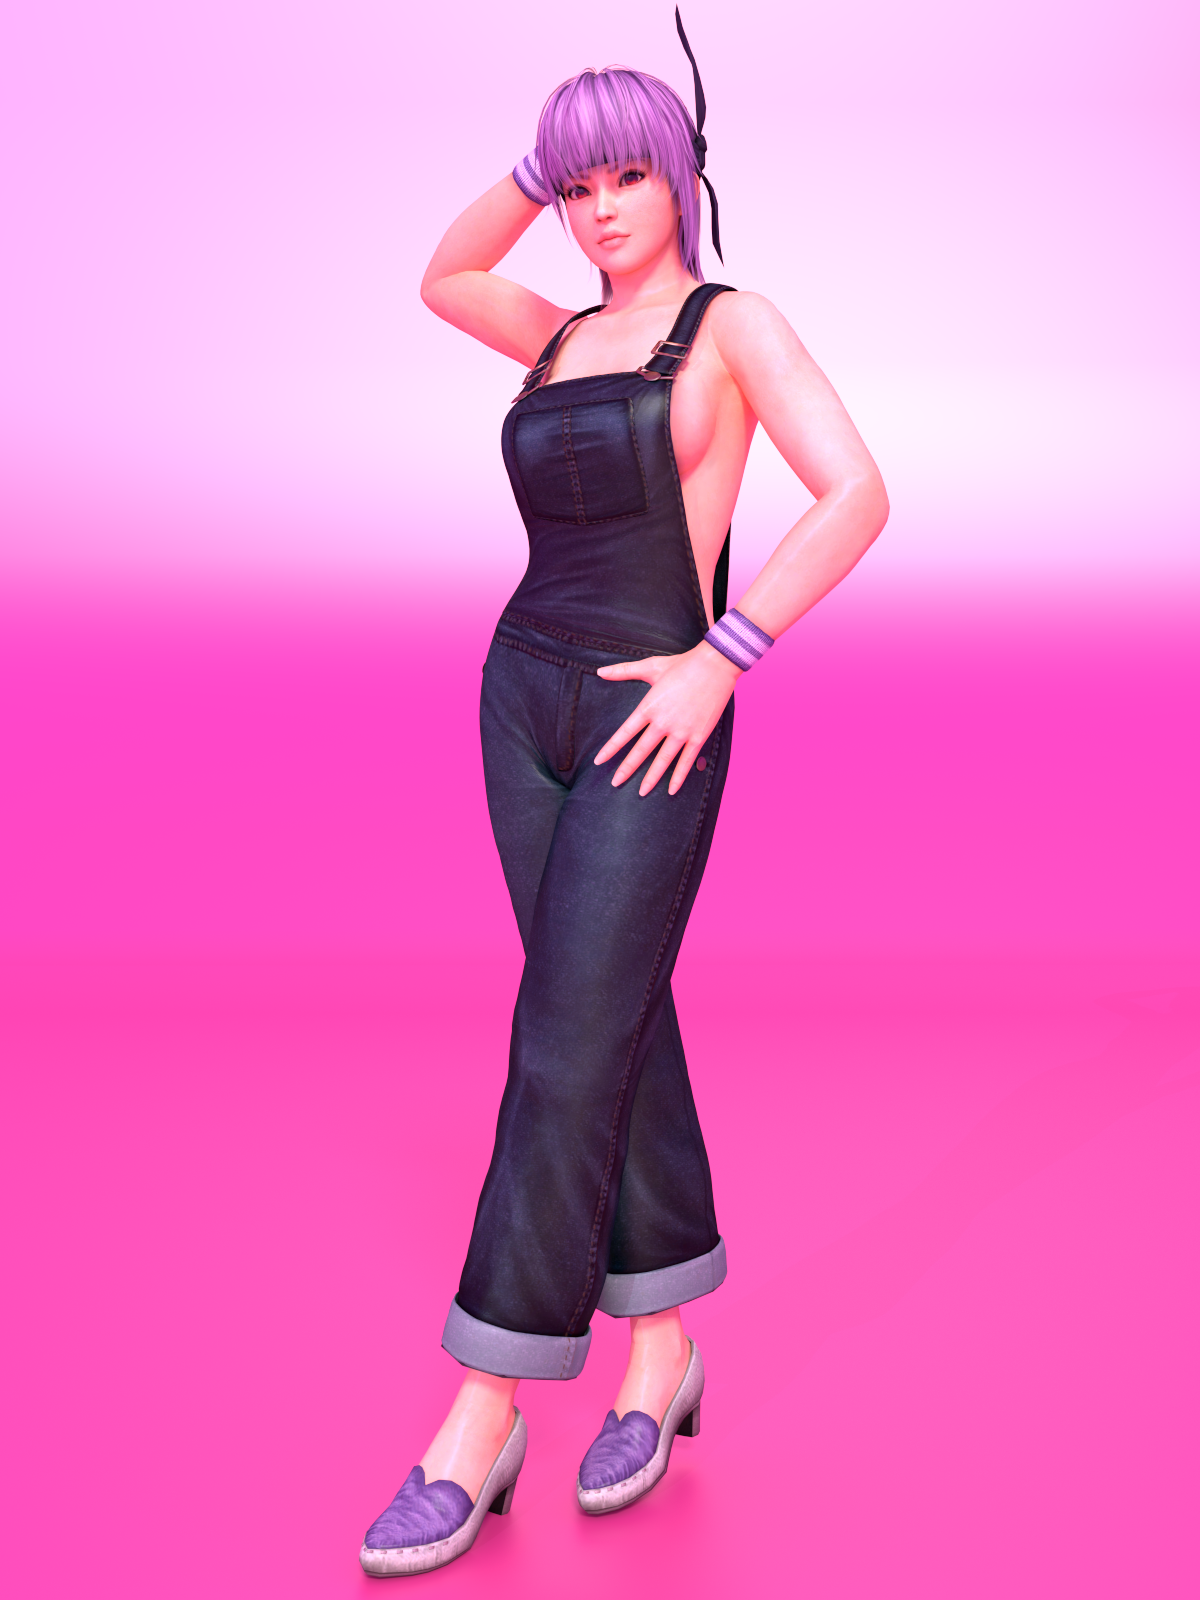 ayane__render__by_trahtenberg-d5rgbex.png